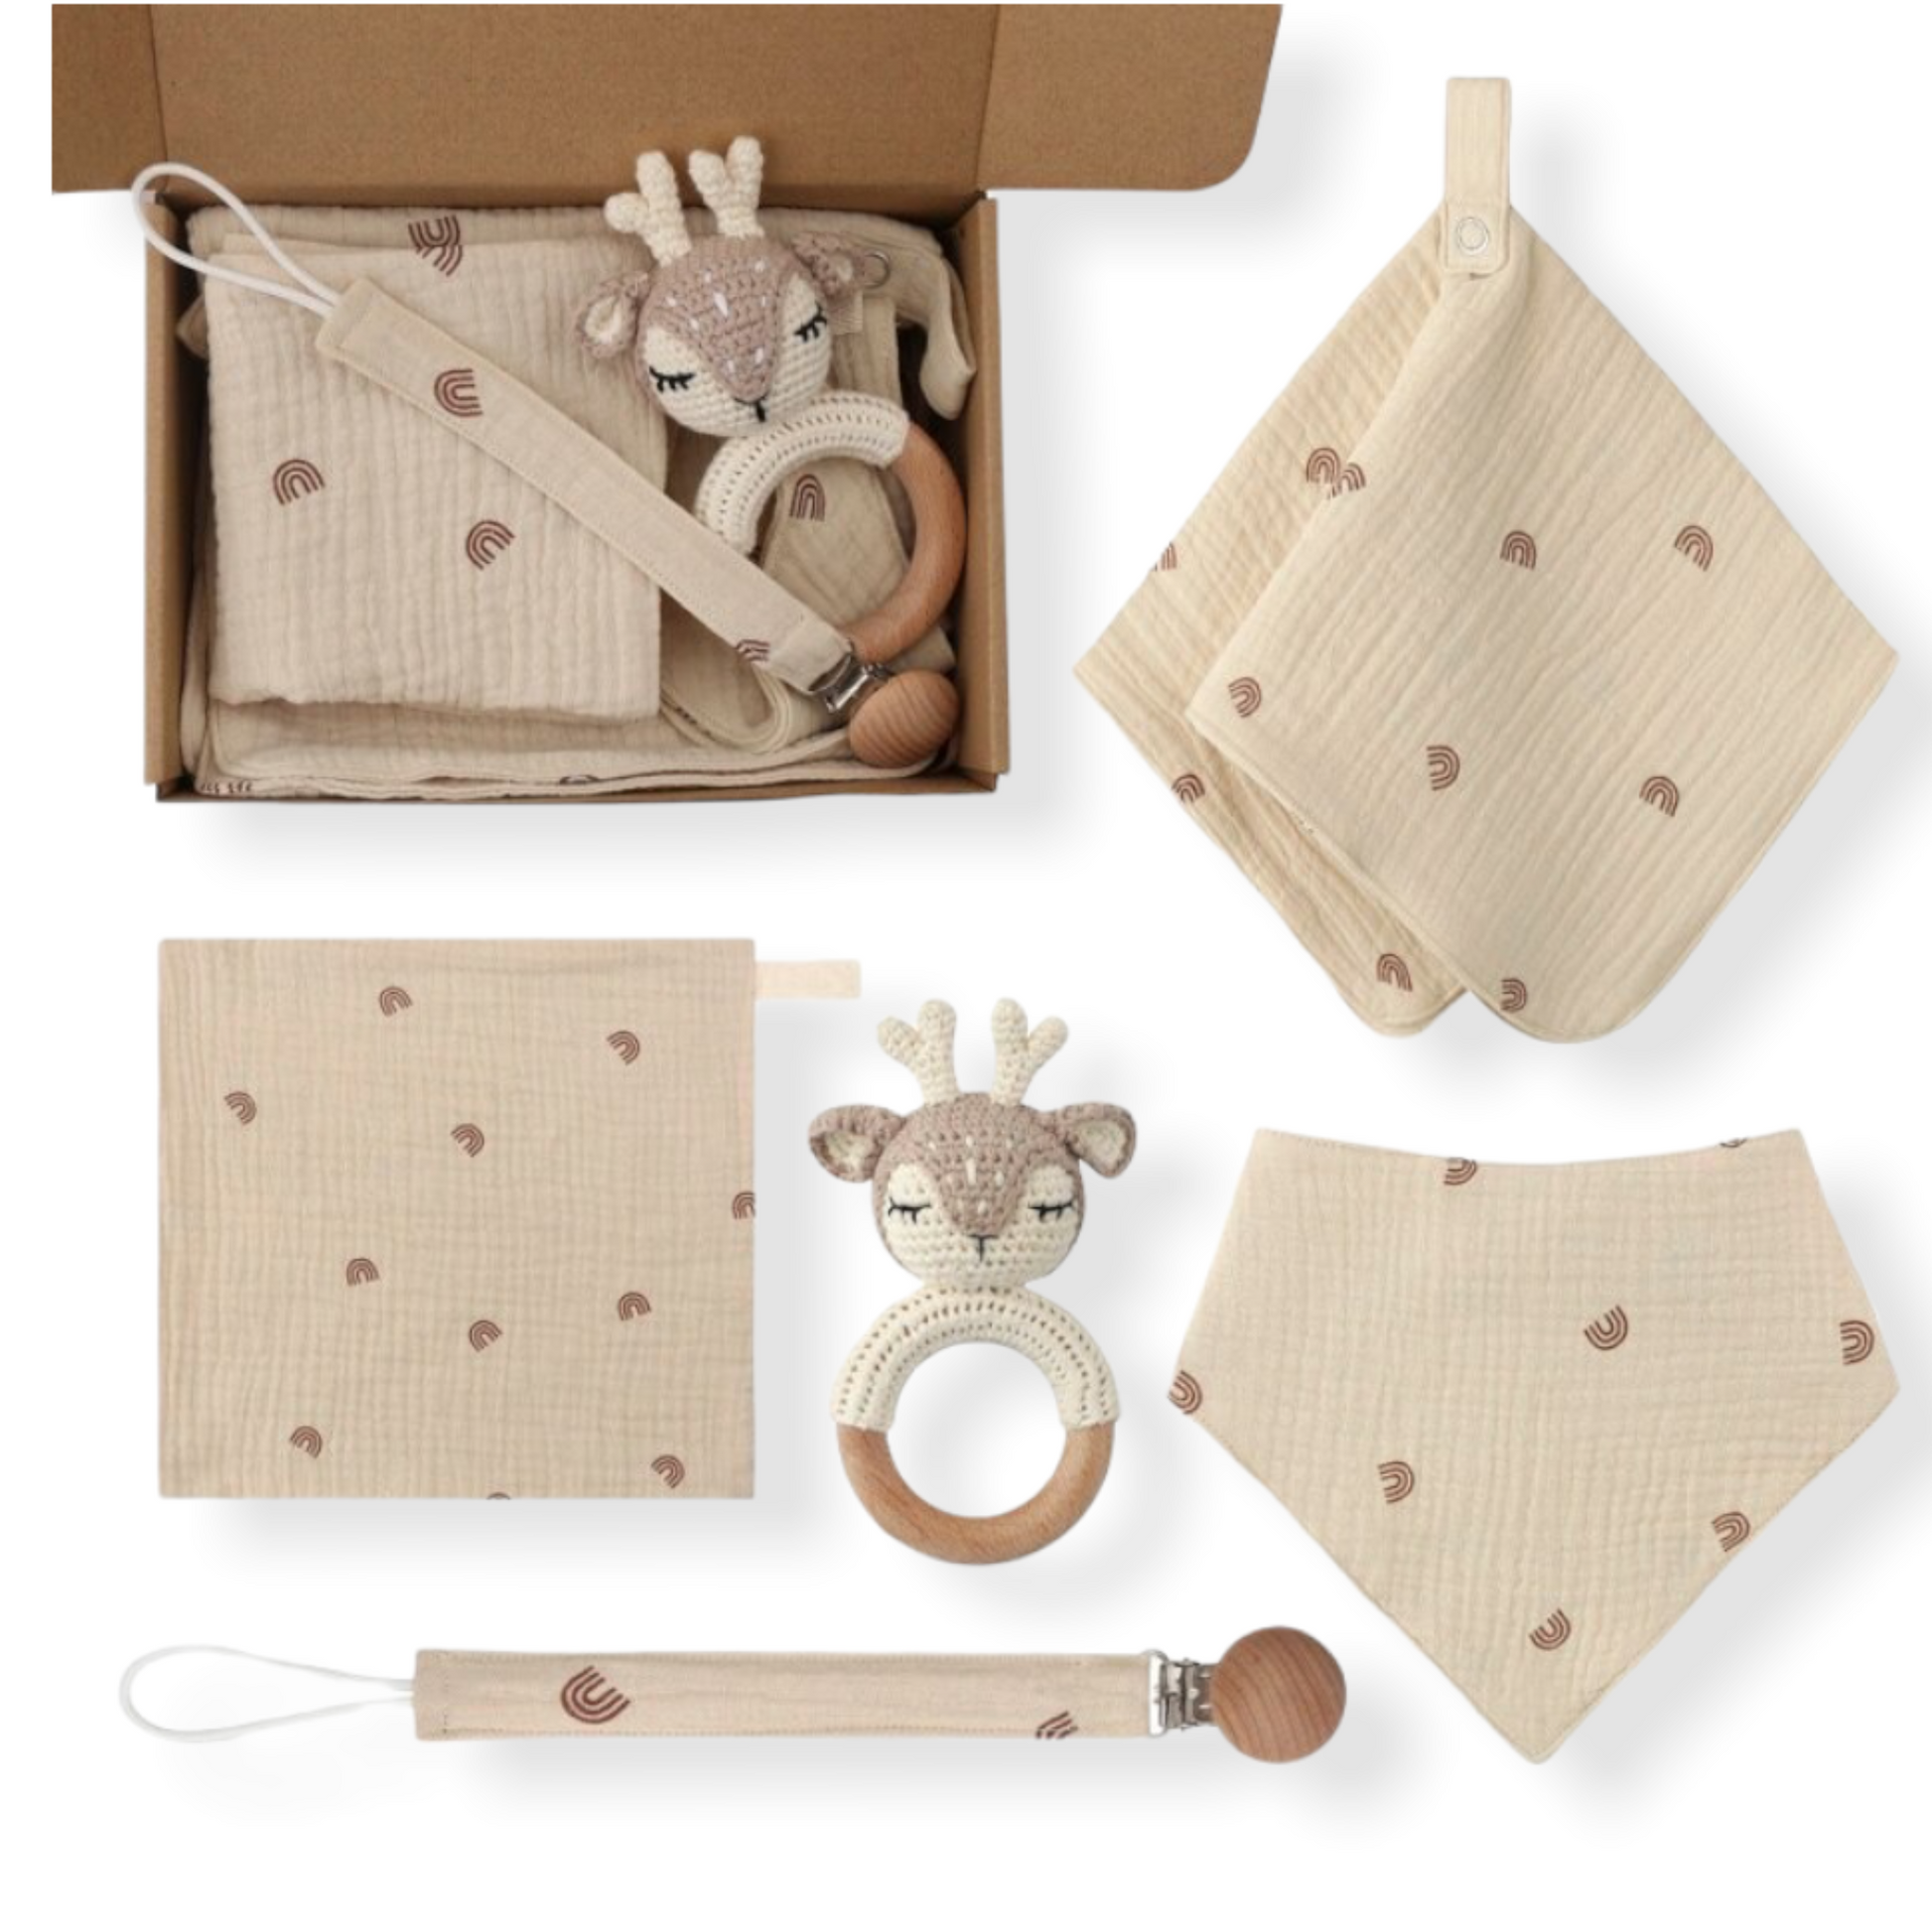 beige deer five piece baby gift set for newborns with bib, swaddle, rattle, handkerchief and fabric pacifier holder